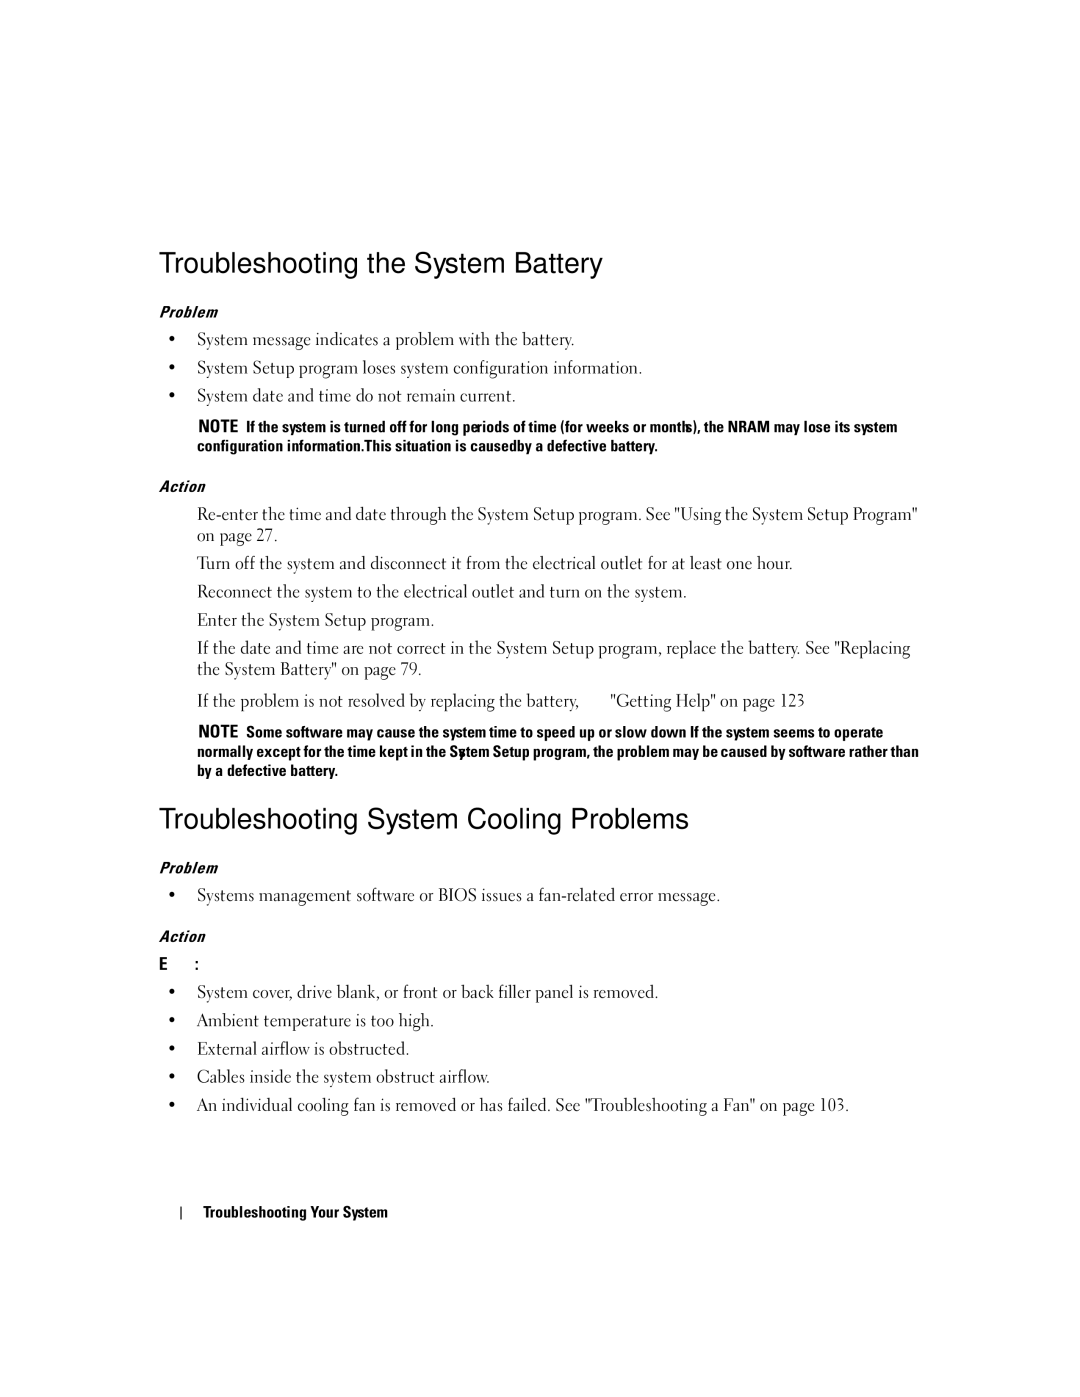 Dell SC1430 owner manual Troubleshooting the System Battery, Troubleshooting System Cooling Problems 